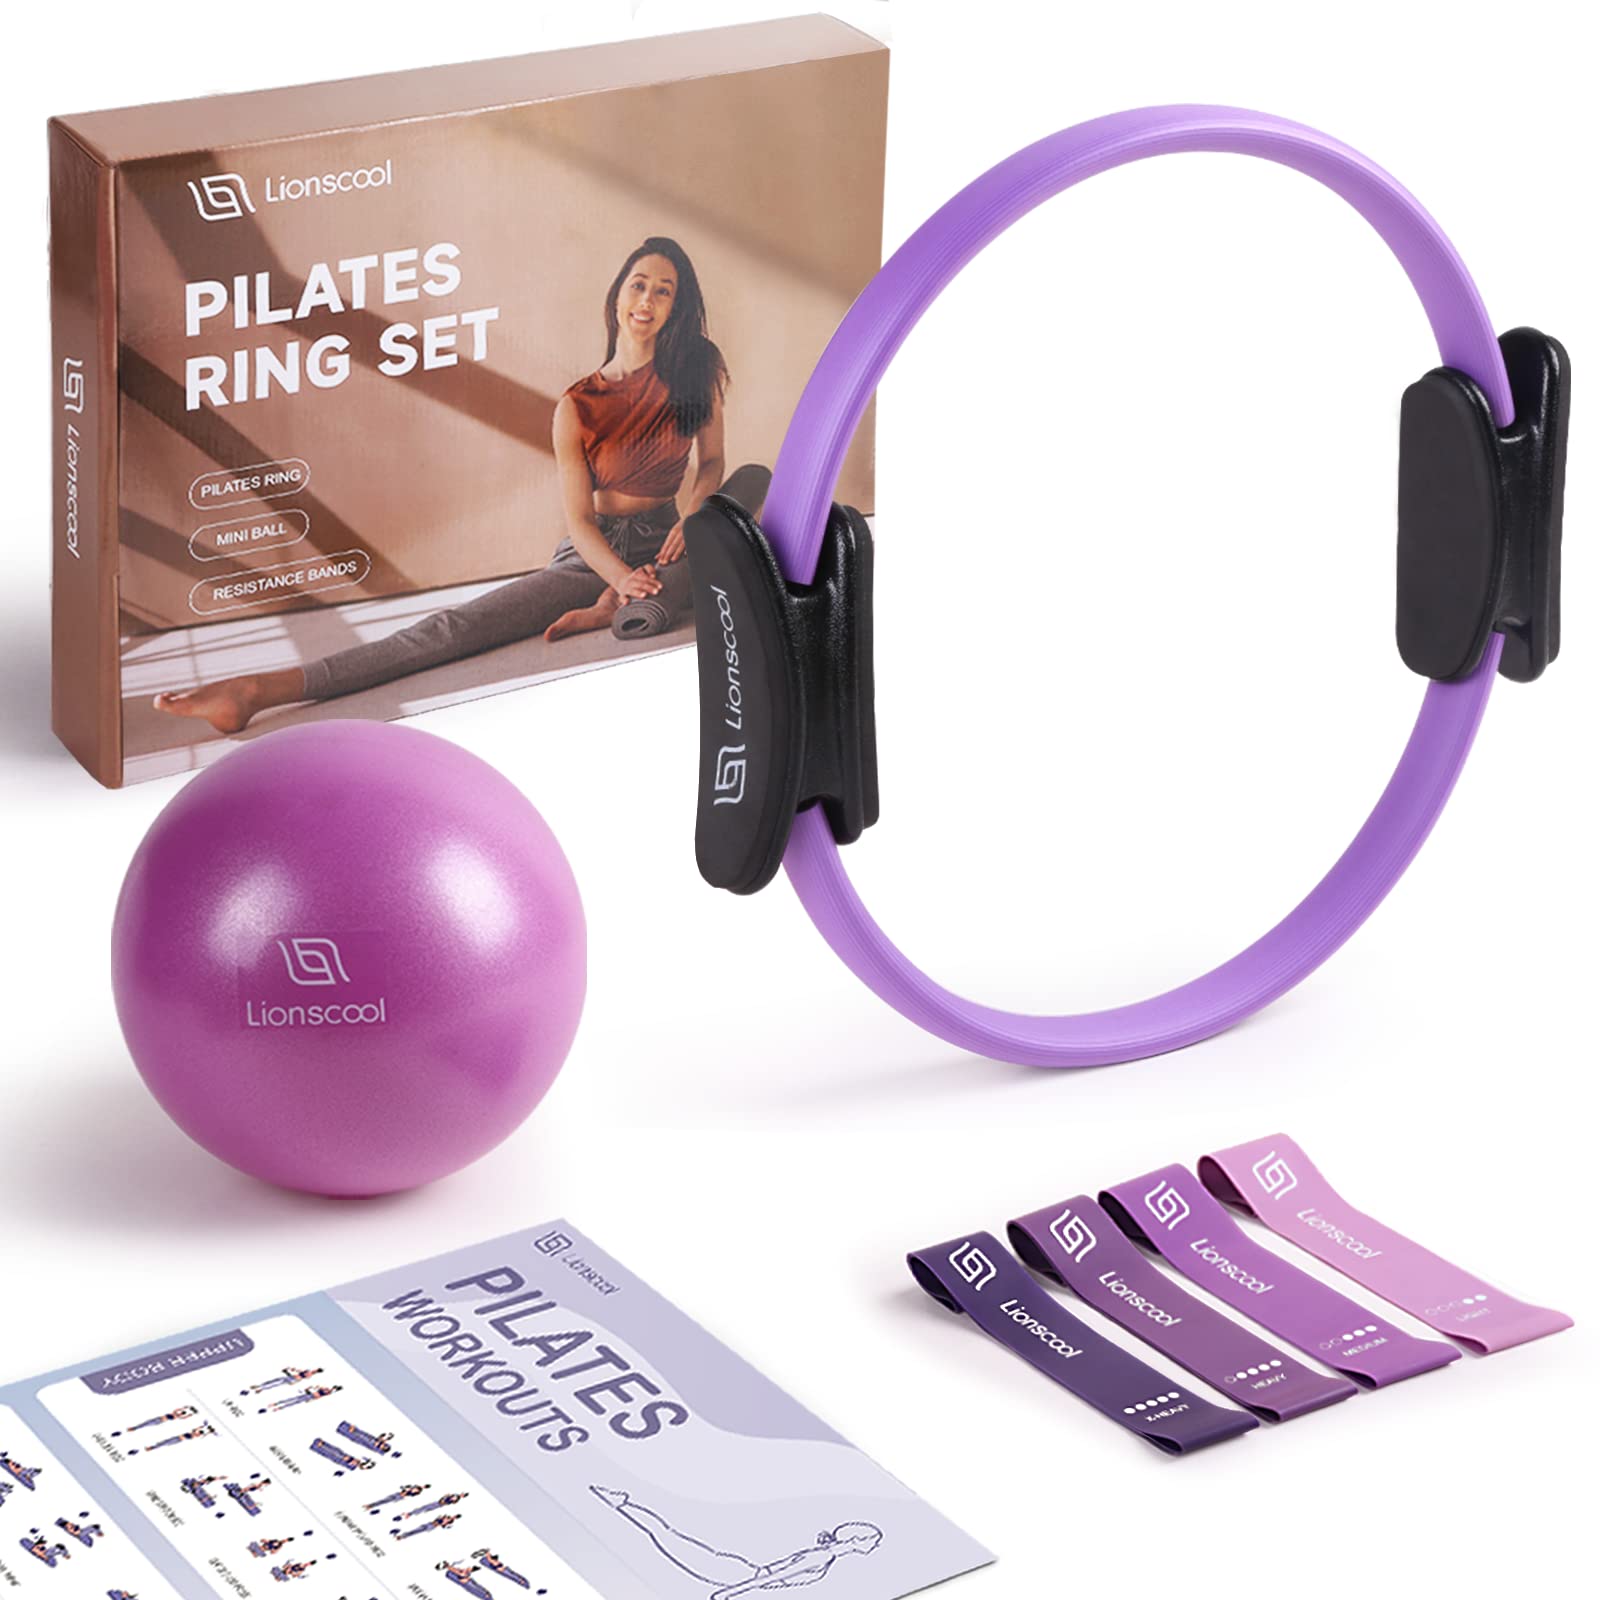 LIONSCOOL PILATES RING SET - Premium Anti-Deformation 14Magic Circle with  Dual Padded Handles - Includes Burst Resistant Pilates Mini Ball & Highly  Elastic Resistance Bands - Free Workout Guide & Bag Purple